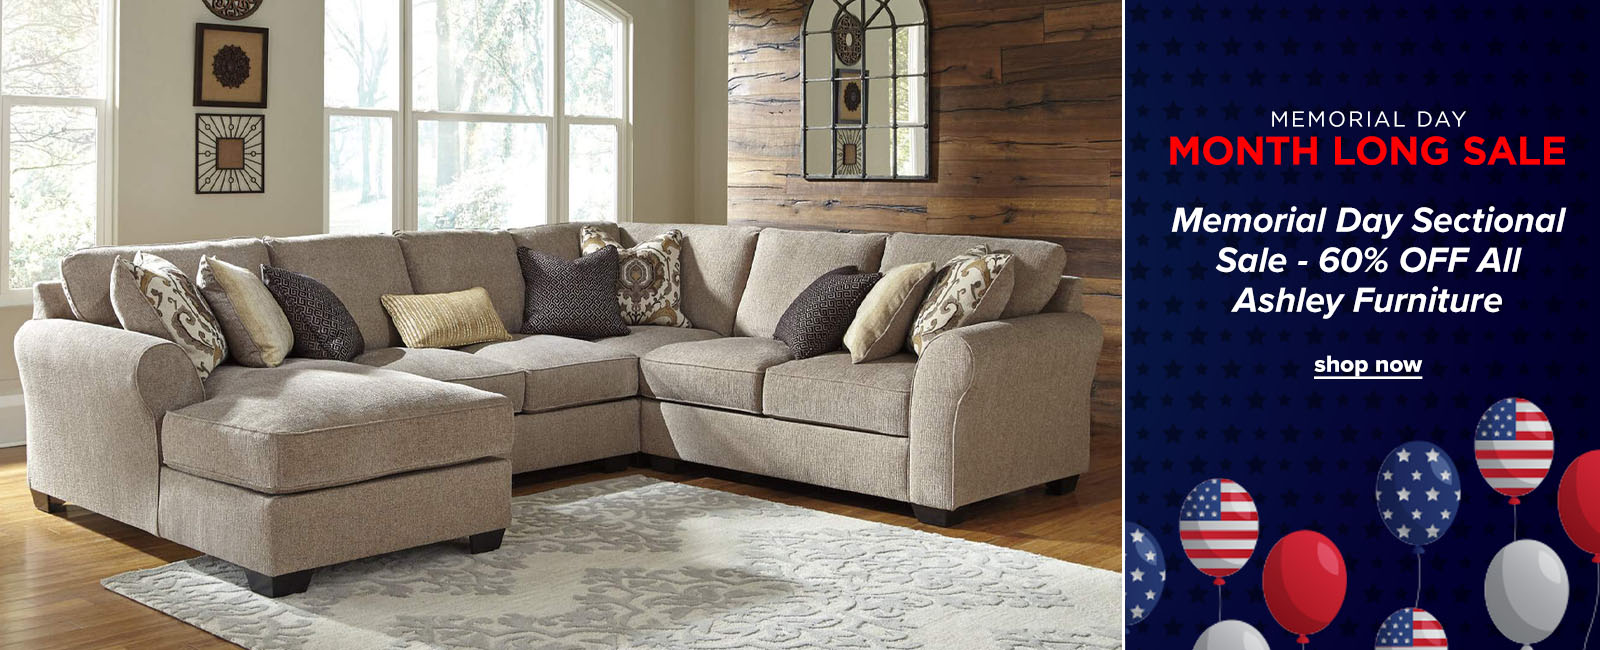 Memorial Day Sectional Sale - 60% OFF All Ashley Furniture